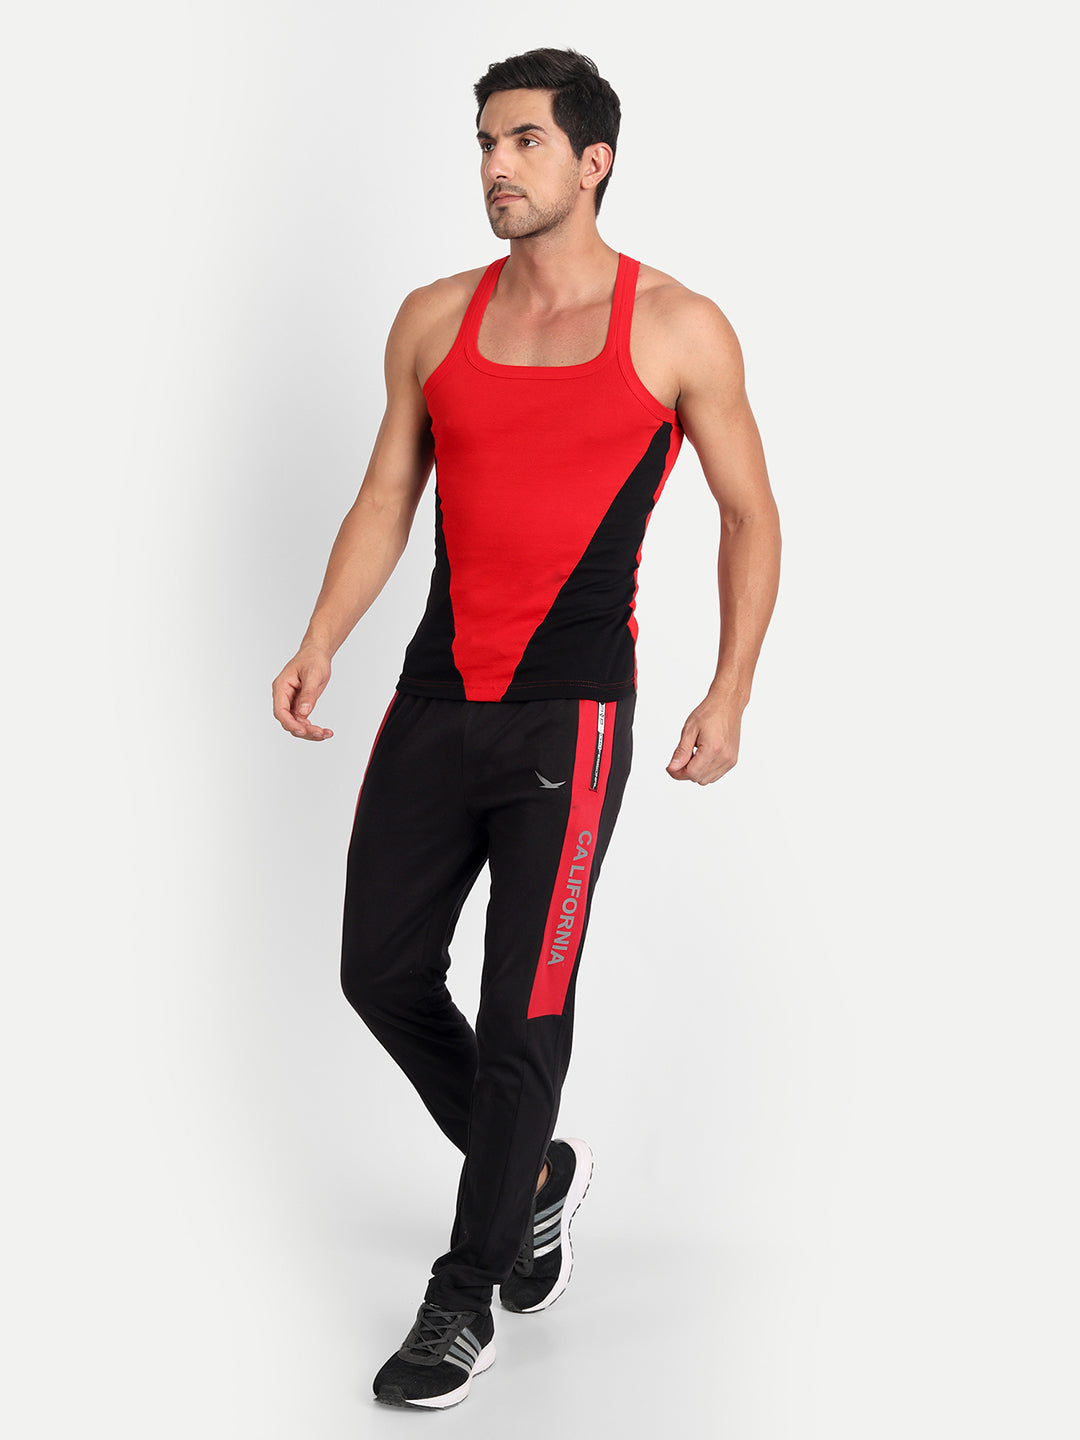 8 Places to Buy the Best Workout Clothes for Men in 2023